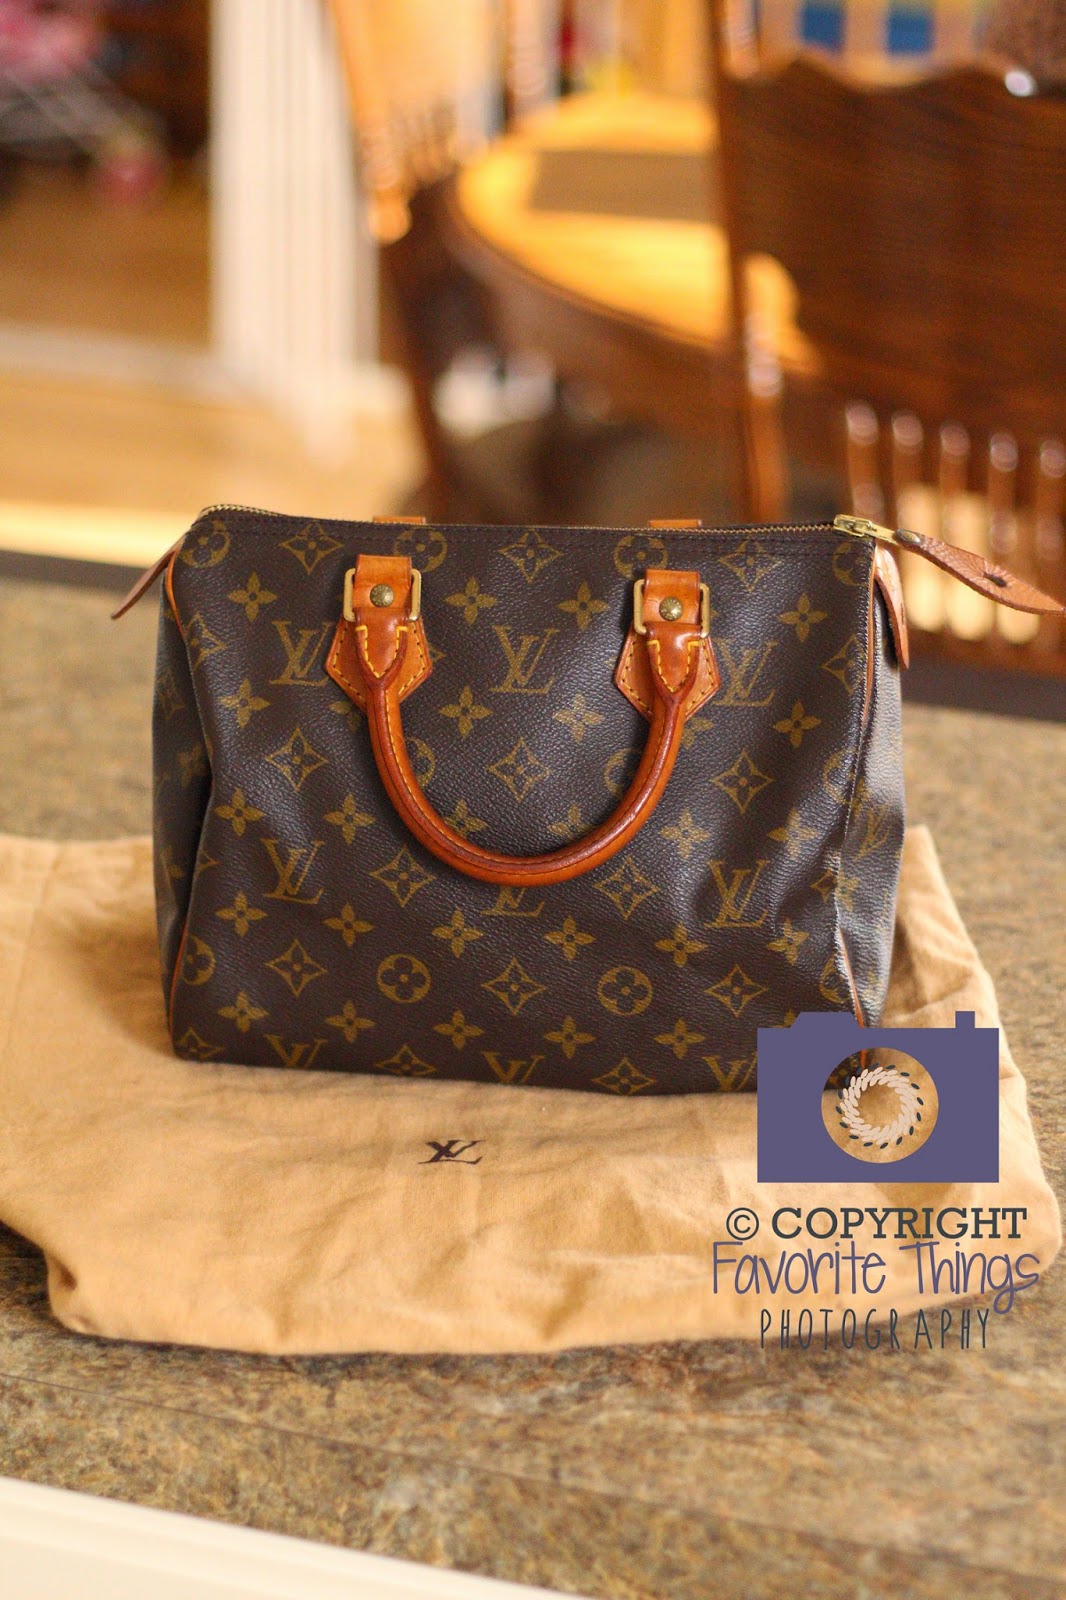 how can i clean my louis vuitton bag